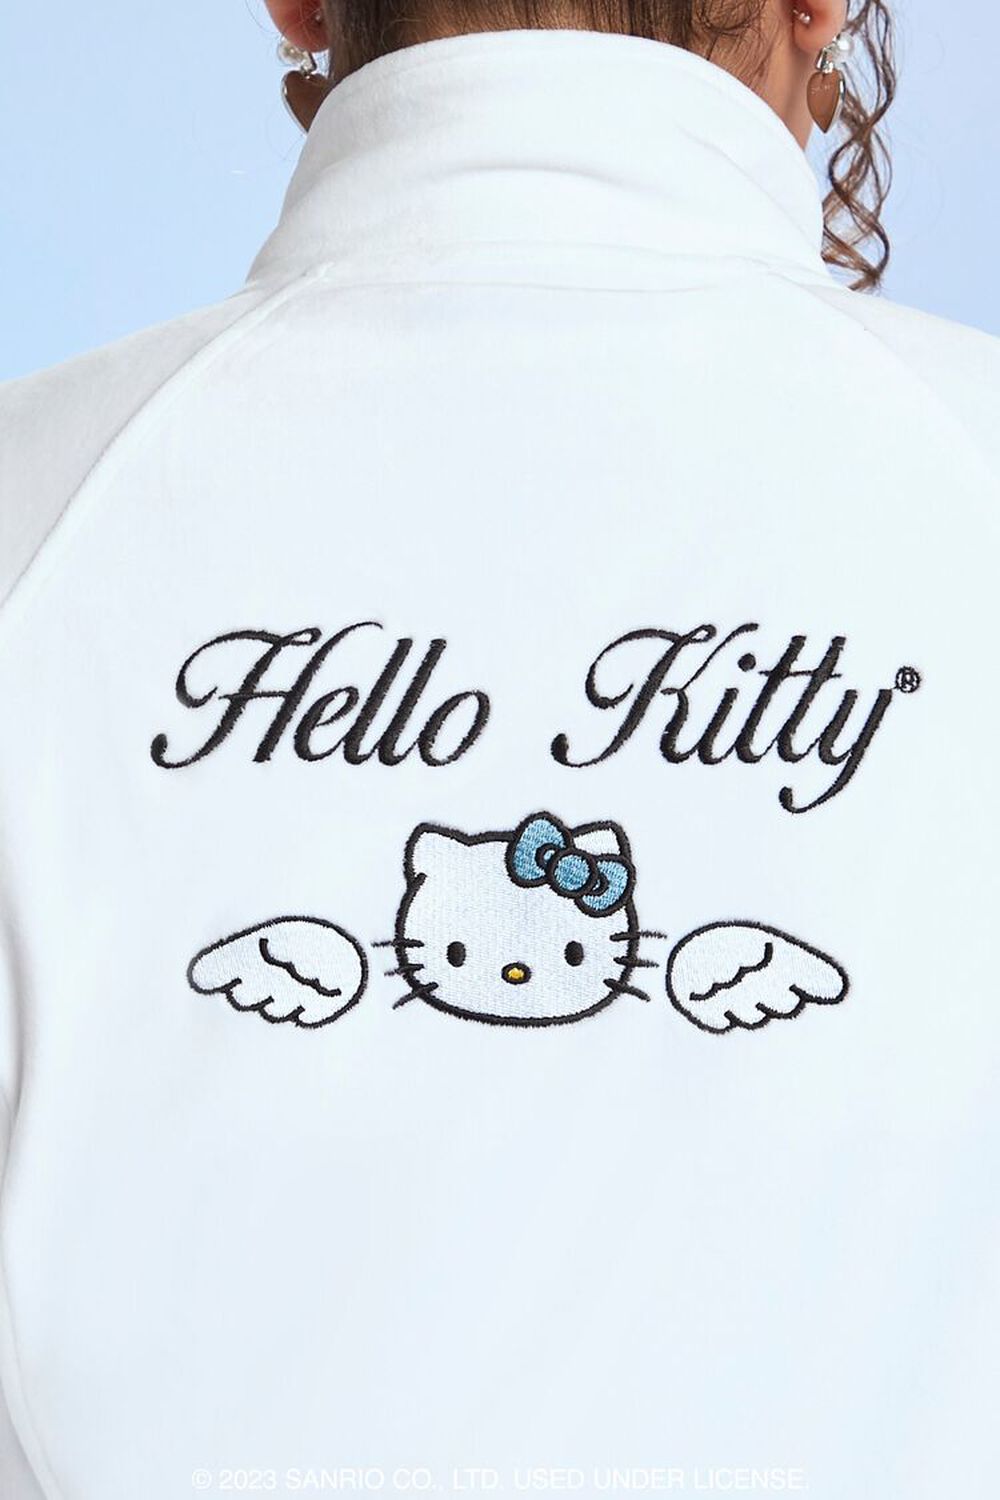 Forever 21 x Hello Kitty Puffer Jacket Size Plus 0X Hot Item Hello Kitty  Friends